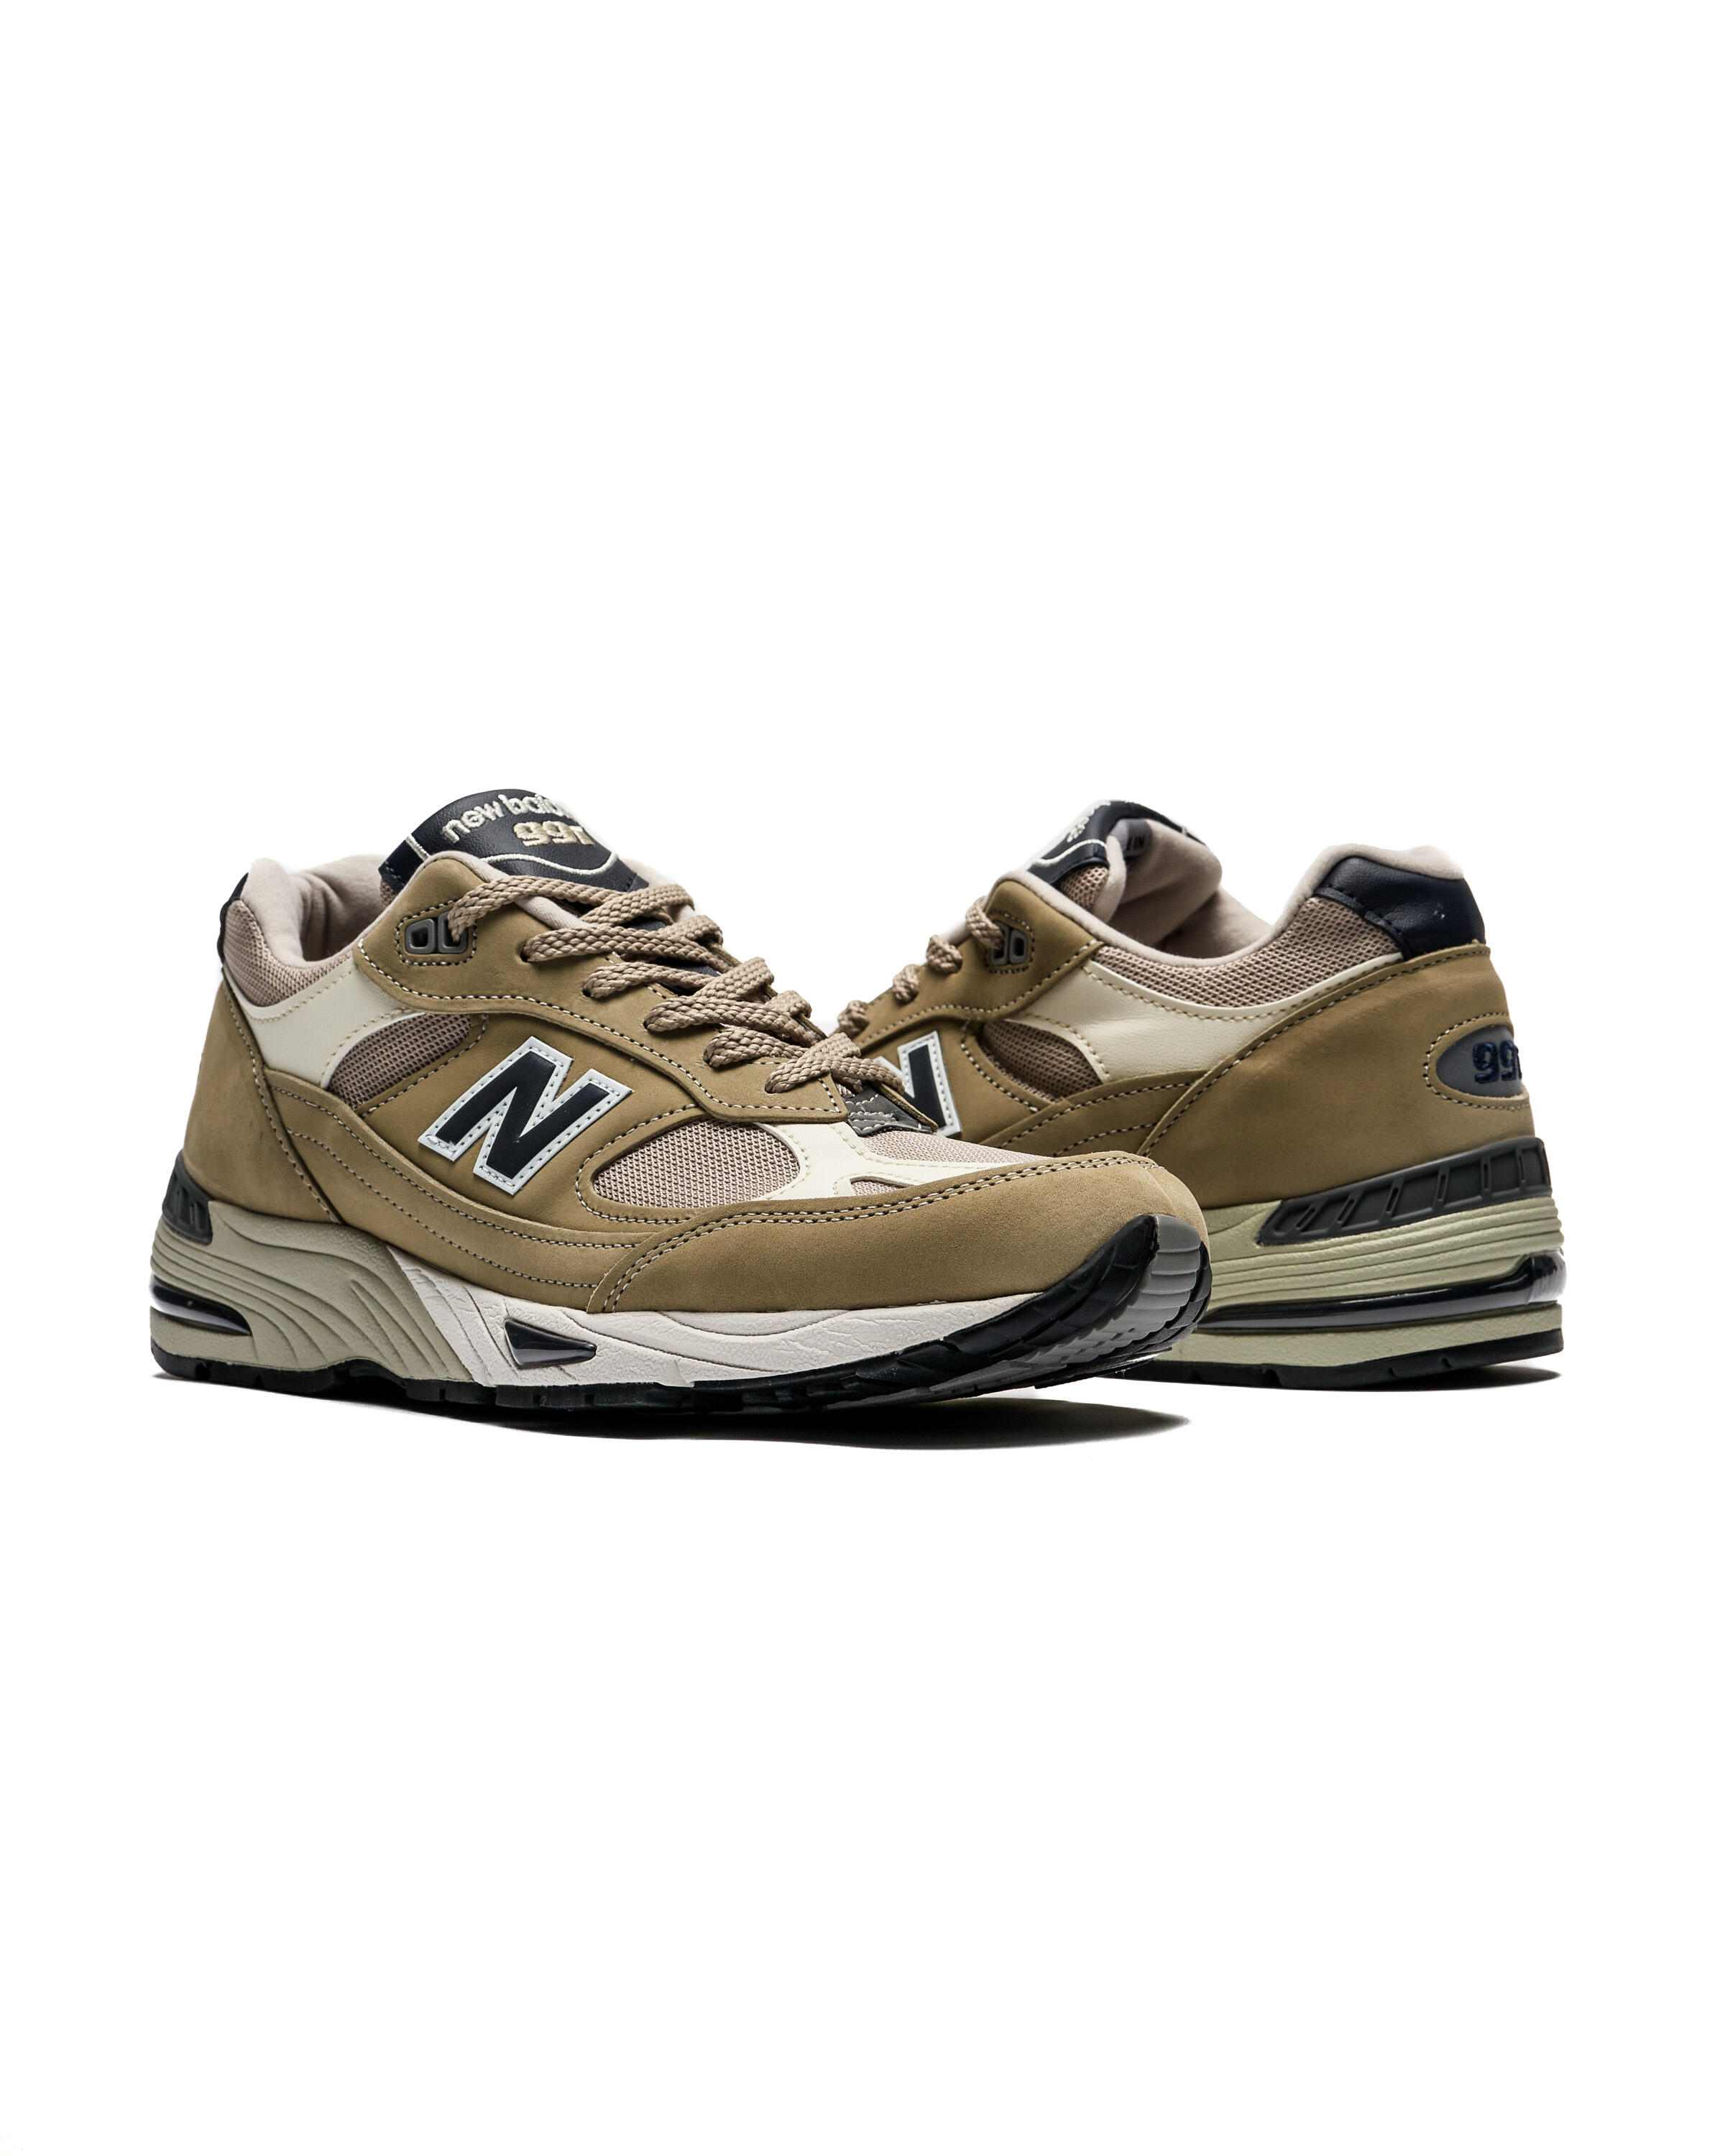 New Balance M 991 BTN - Made in England